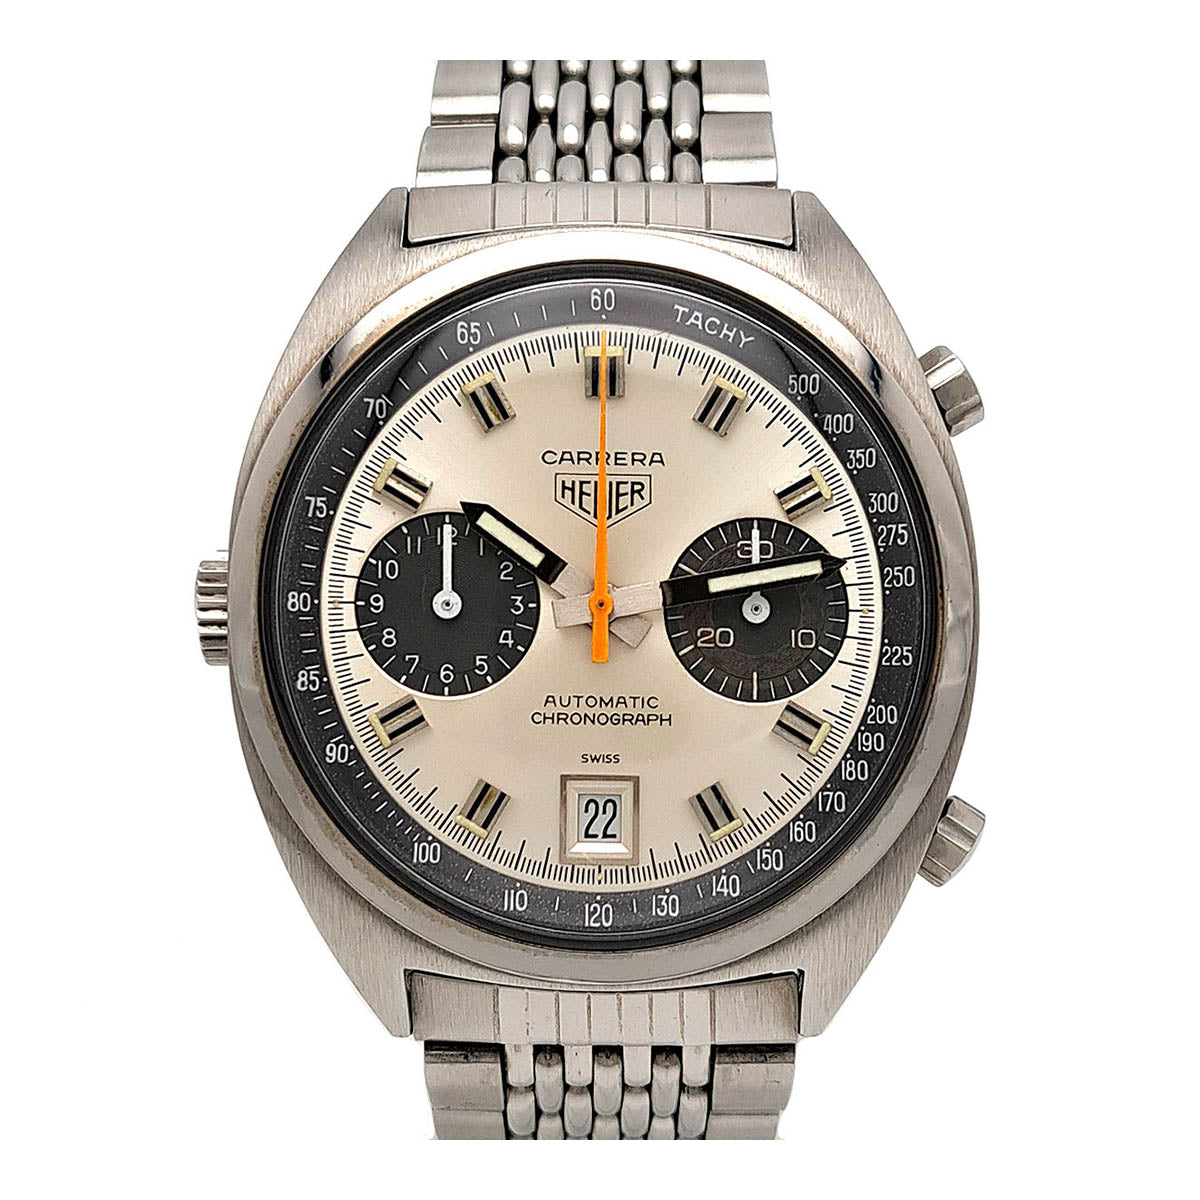 TAG Heuer Carrera Calibre 12 Automatic Chronograph Stainless Steel Men's Vintage Watch - Antique Collection 1153.0